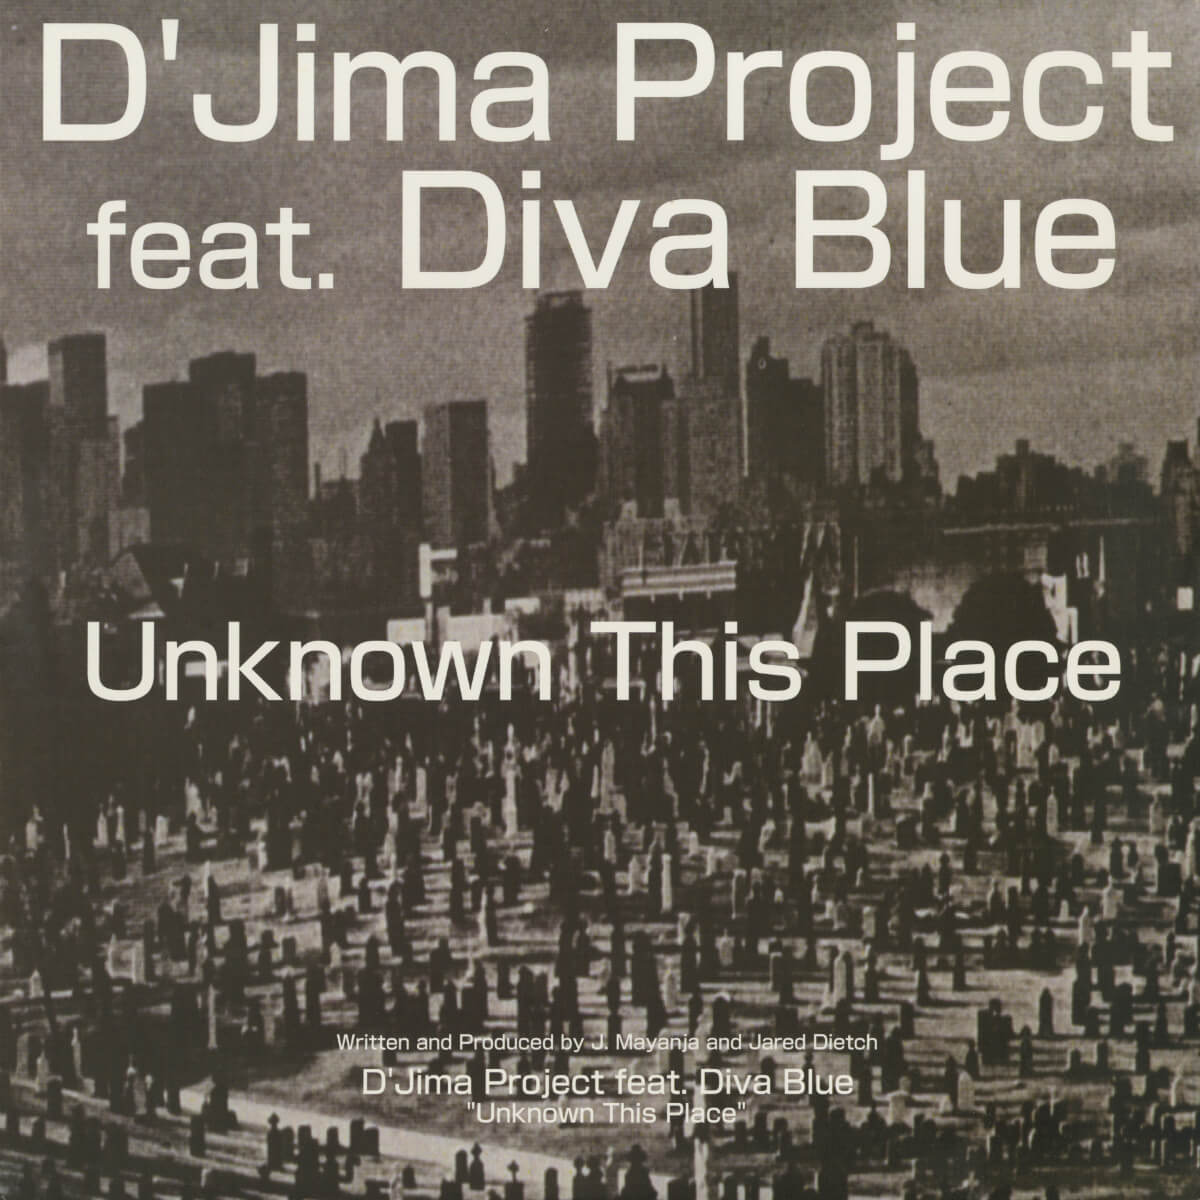 D'Jima Project Feat. Diva Blue – Unknown This Place